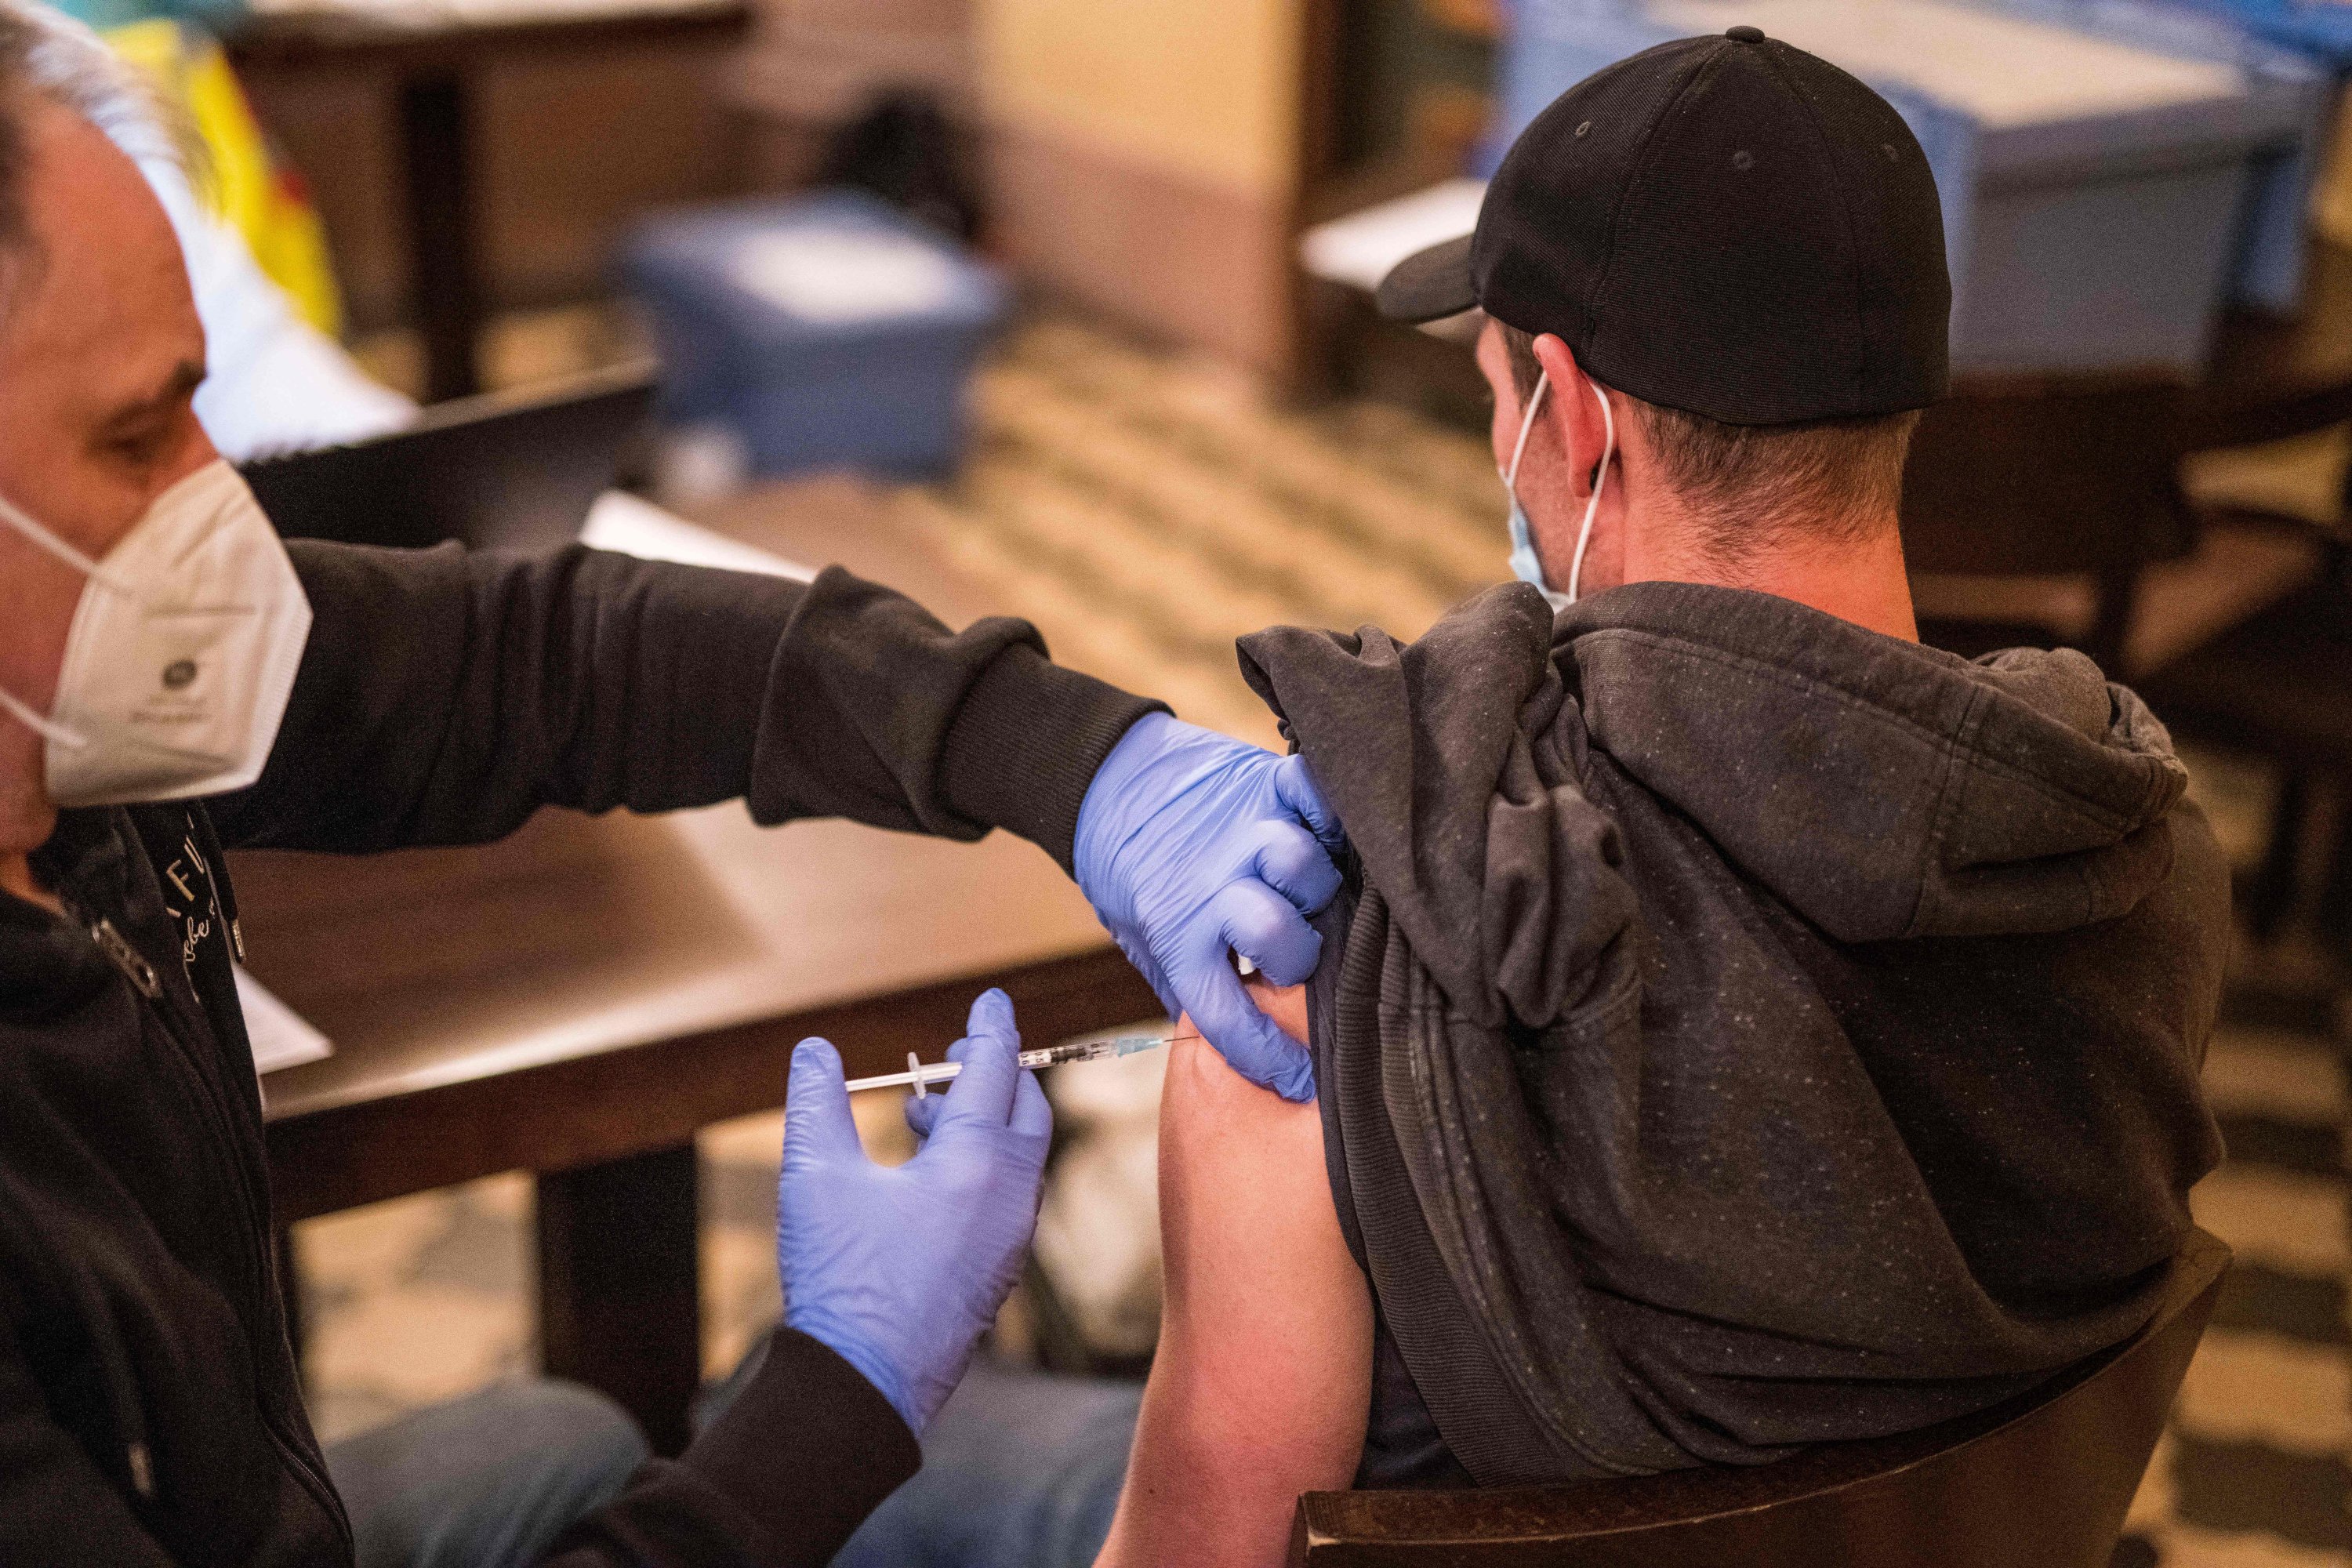 A man receives a vaccination against COVID-19 in Frankfurt am Main on Nov. 23, 2021 during an event where people in need are offered the vaccination and a meal. (AFP Photo)